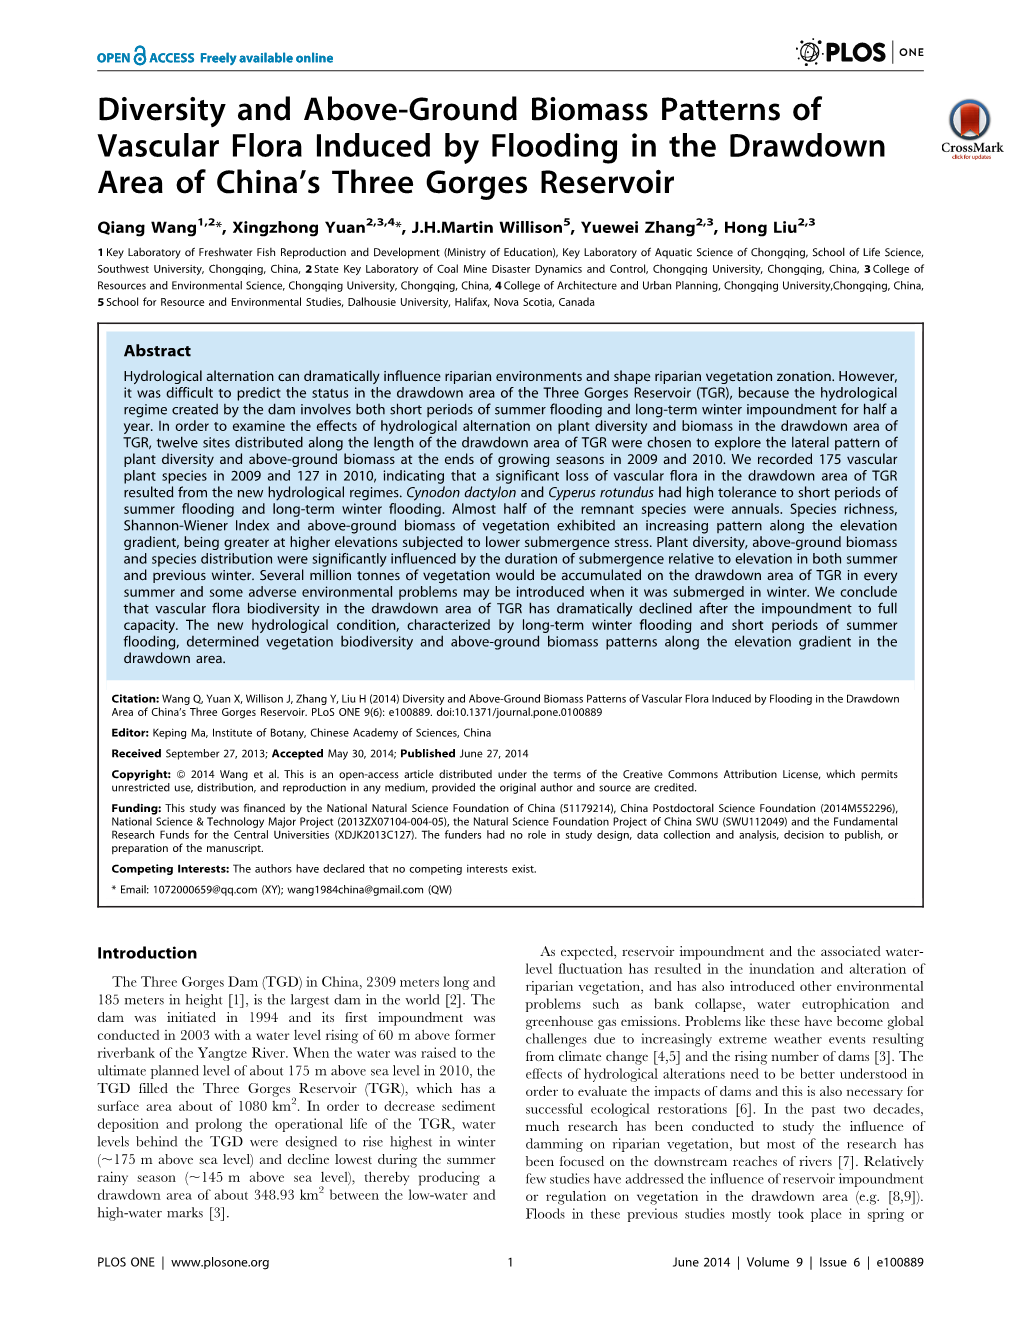 Diversity and Above-Ground Biomass Patterns of Vascular Flora Induced by Flooding in the Drawdown Area of China’S Three Gorges Reservoir